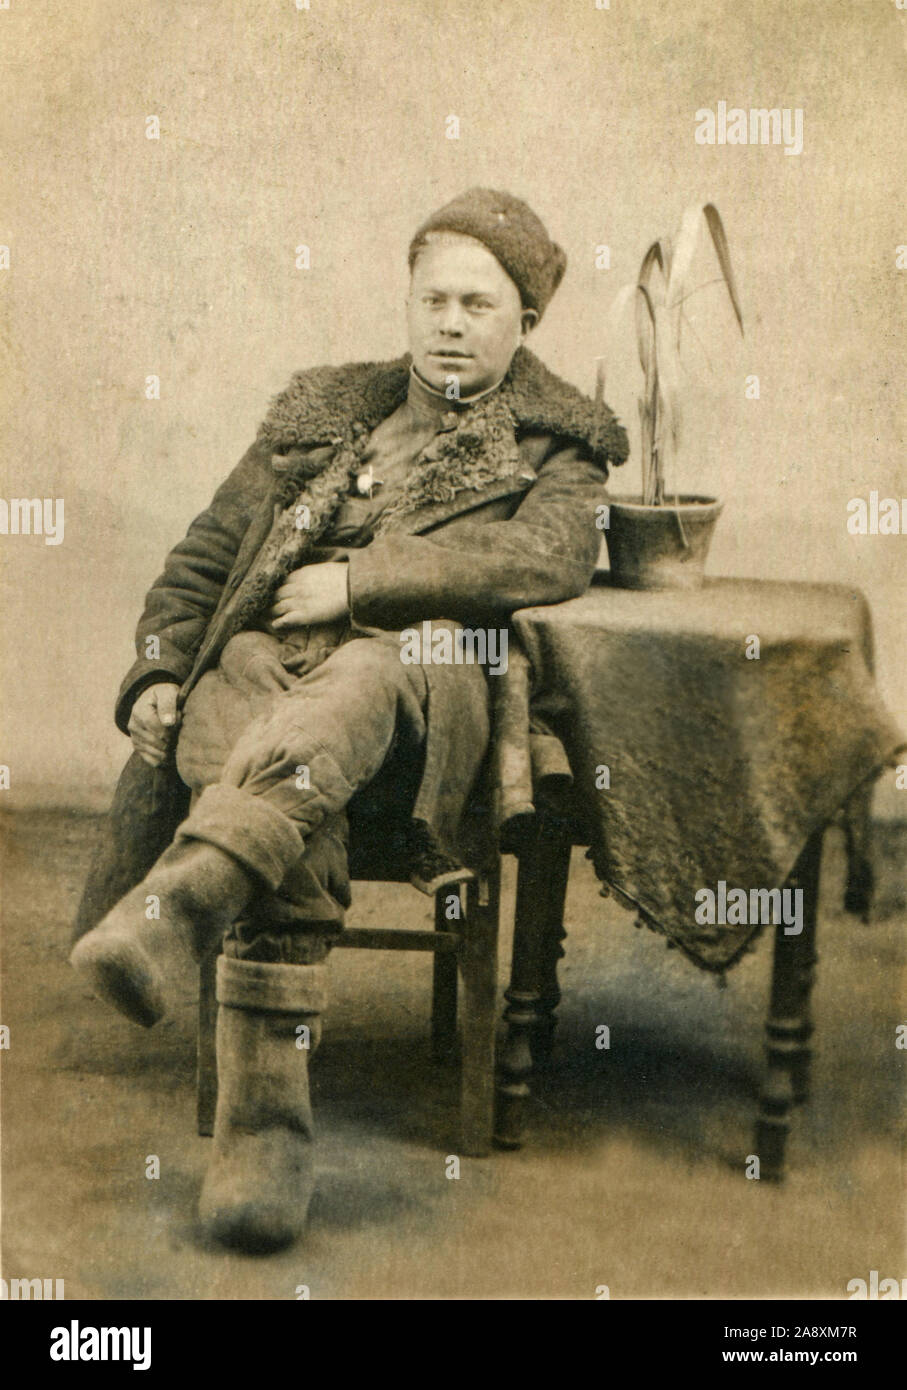 1946 year. March 23rd. Manguria. Dunan city. The Red Army was based in China. Military in winter uniform. On it a sheepskin coat, boots, hat - a kubanka. Stock Photo